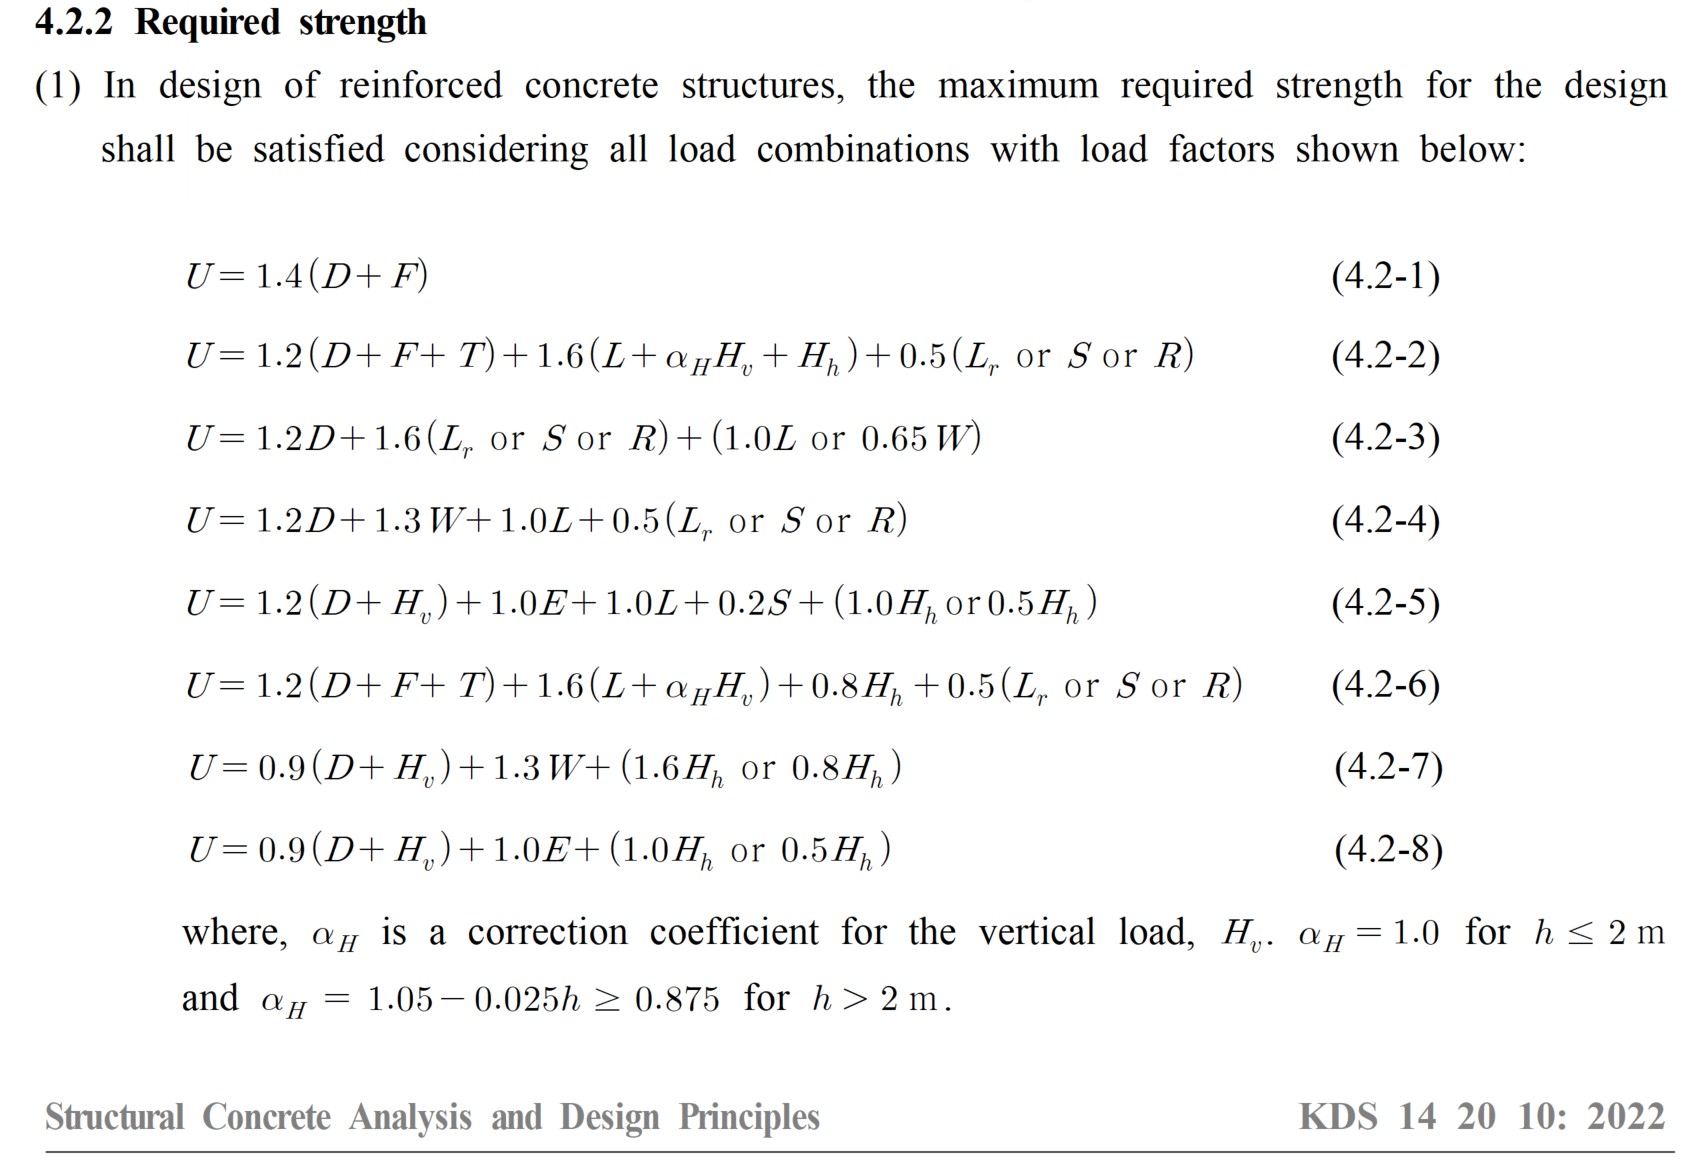 Fig. 7. Load Combinations, Structural Concrete Analysis and Design Principles (KDS 14 20 10)